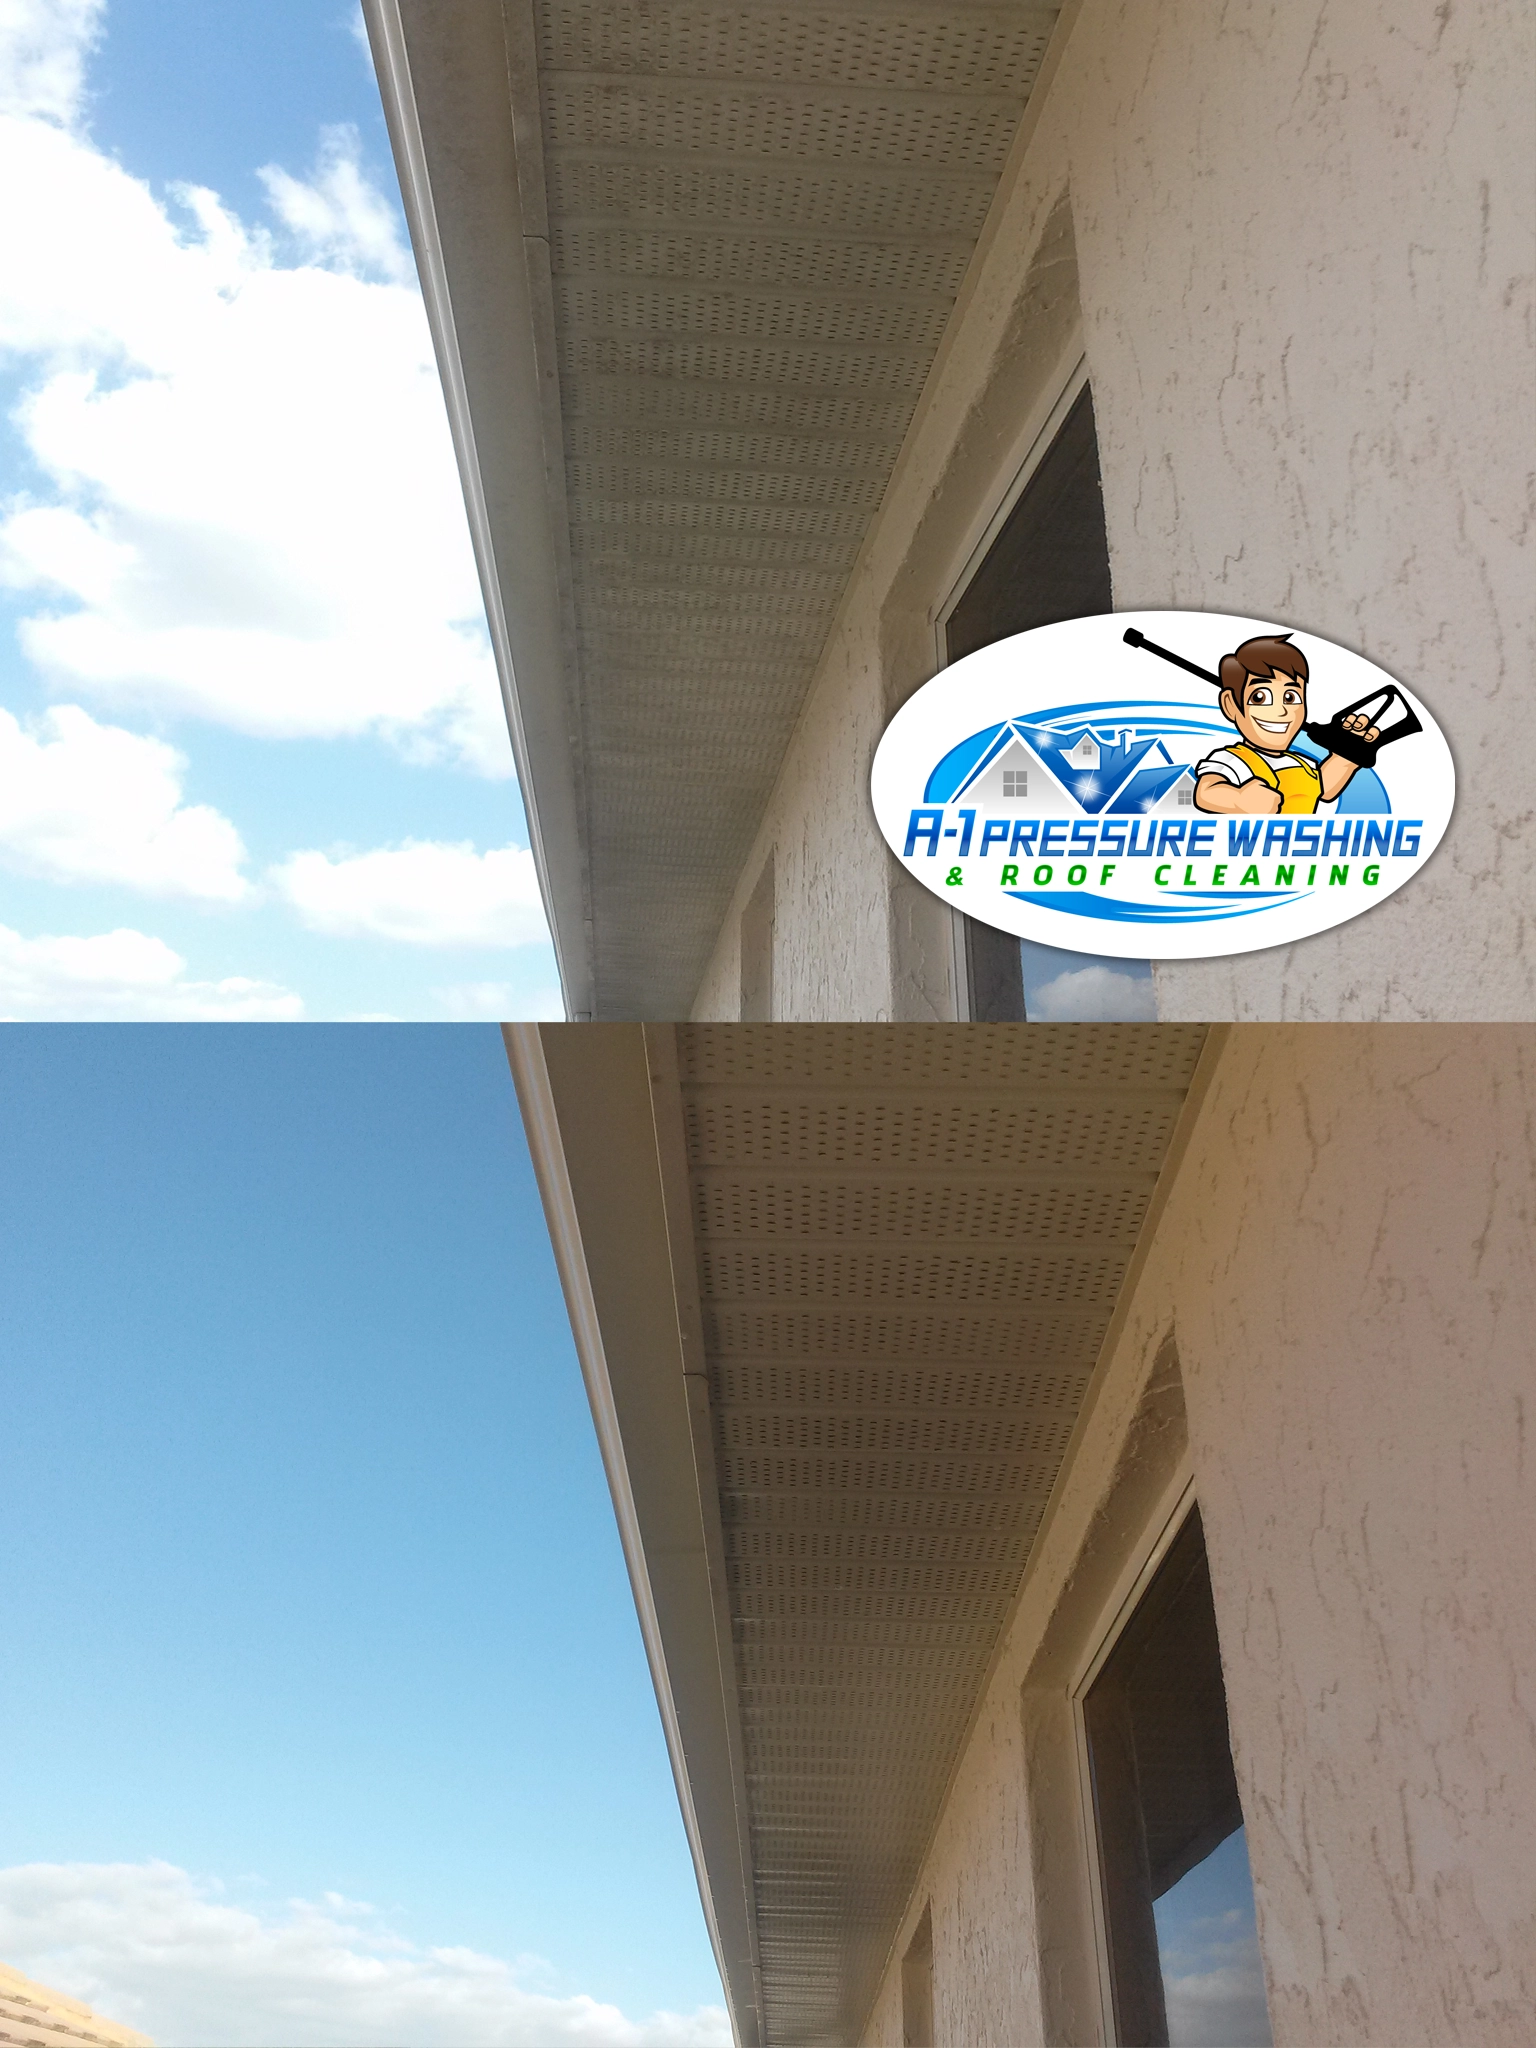 House Washing Service |  A-1 Pressure Washing & Roof Cleaning | 941-815-8454 